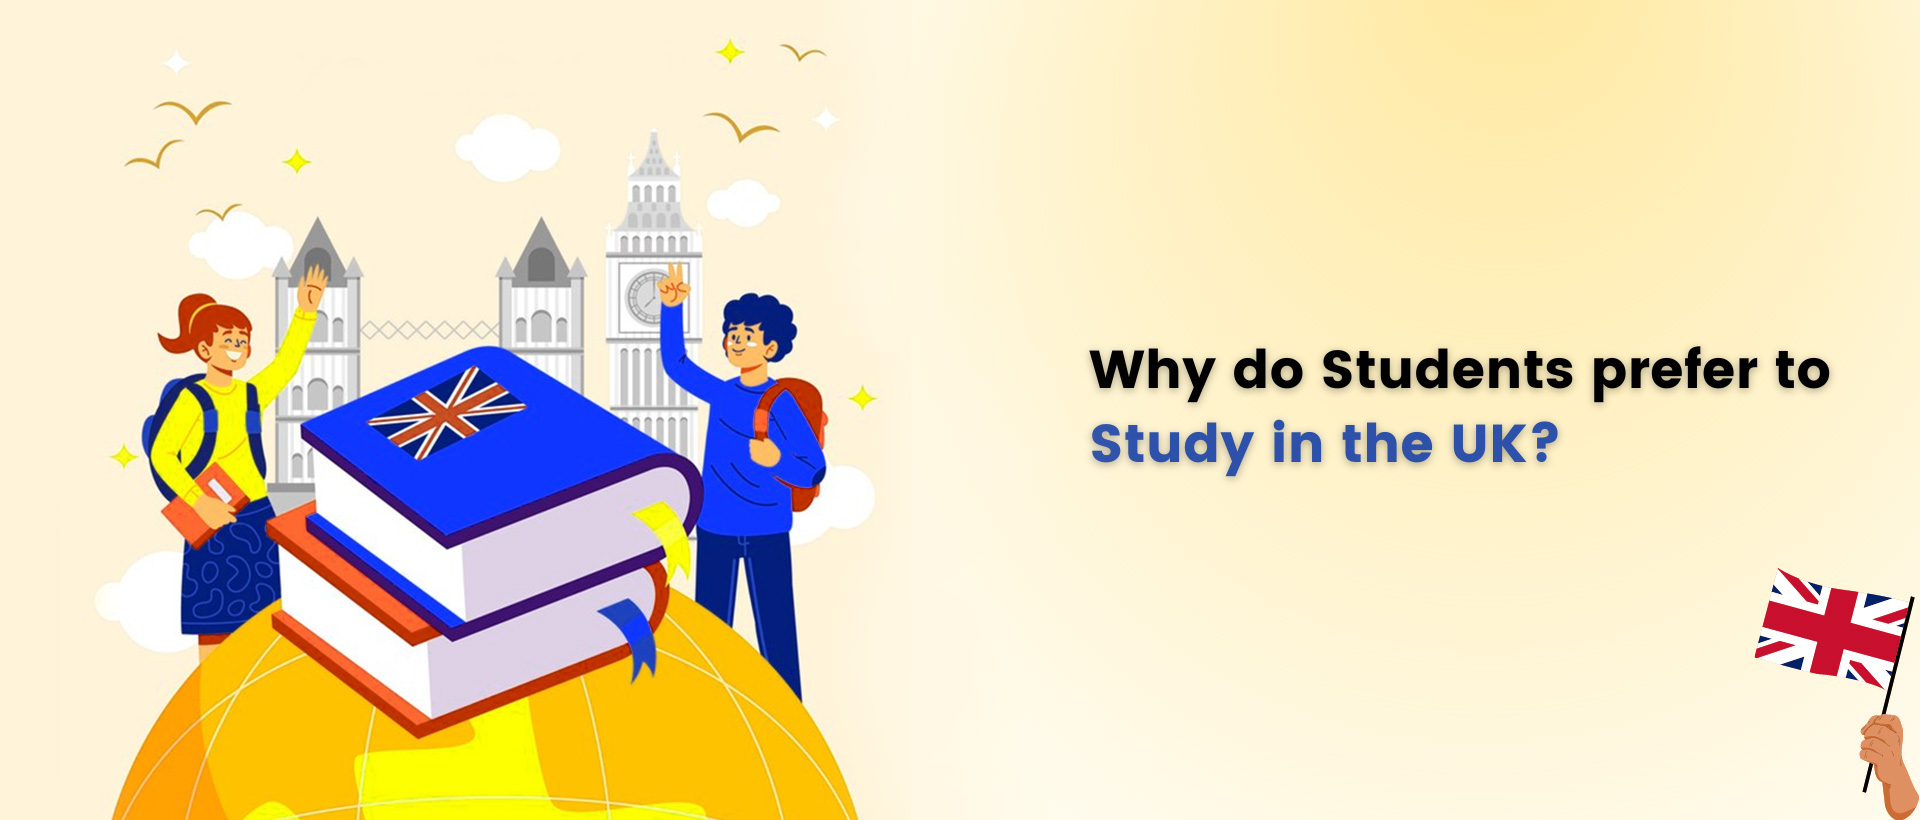 Why do Students prefer to Study in the UK?